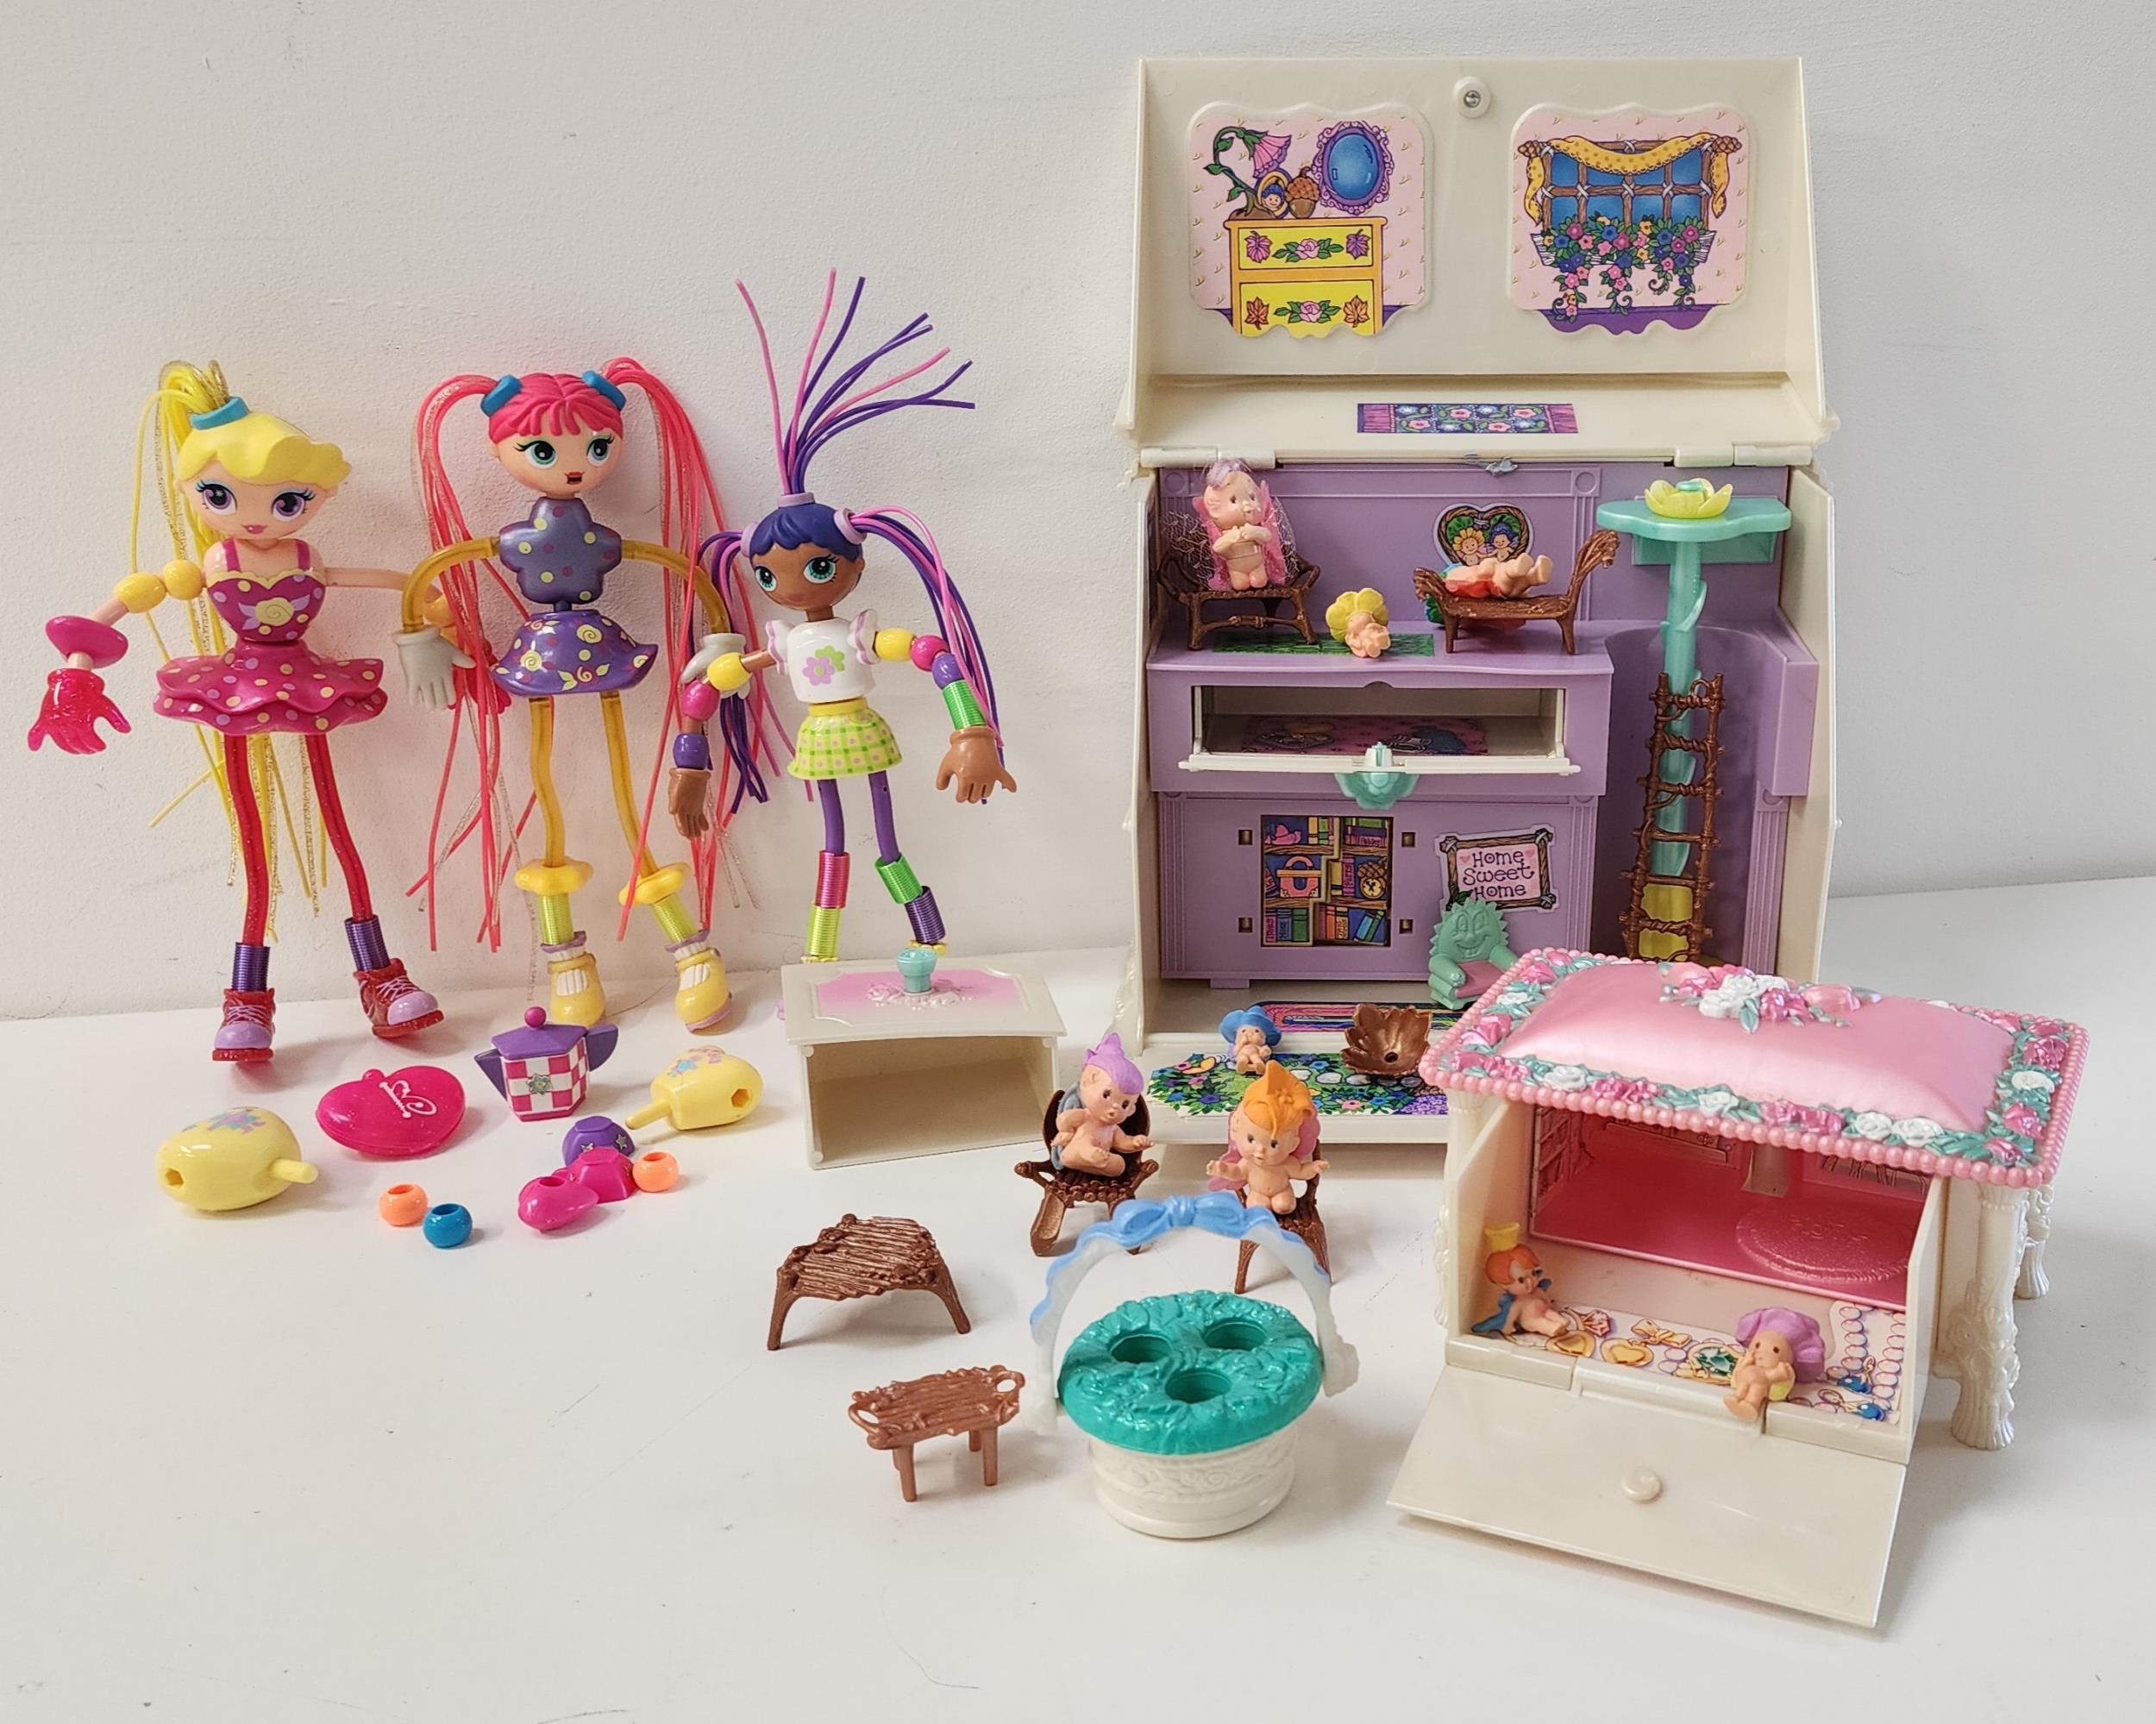 SELECTION OF TOYS comprising Tonka fairies and accessories, Betty Spaghetti dolls, Flintstones car - Image 2 of 3